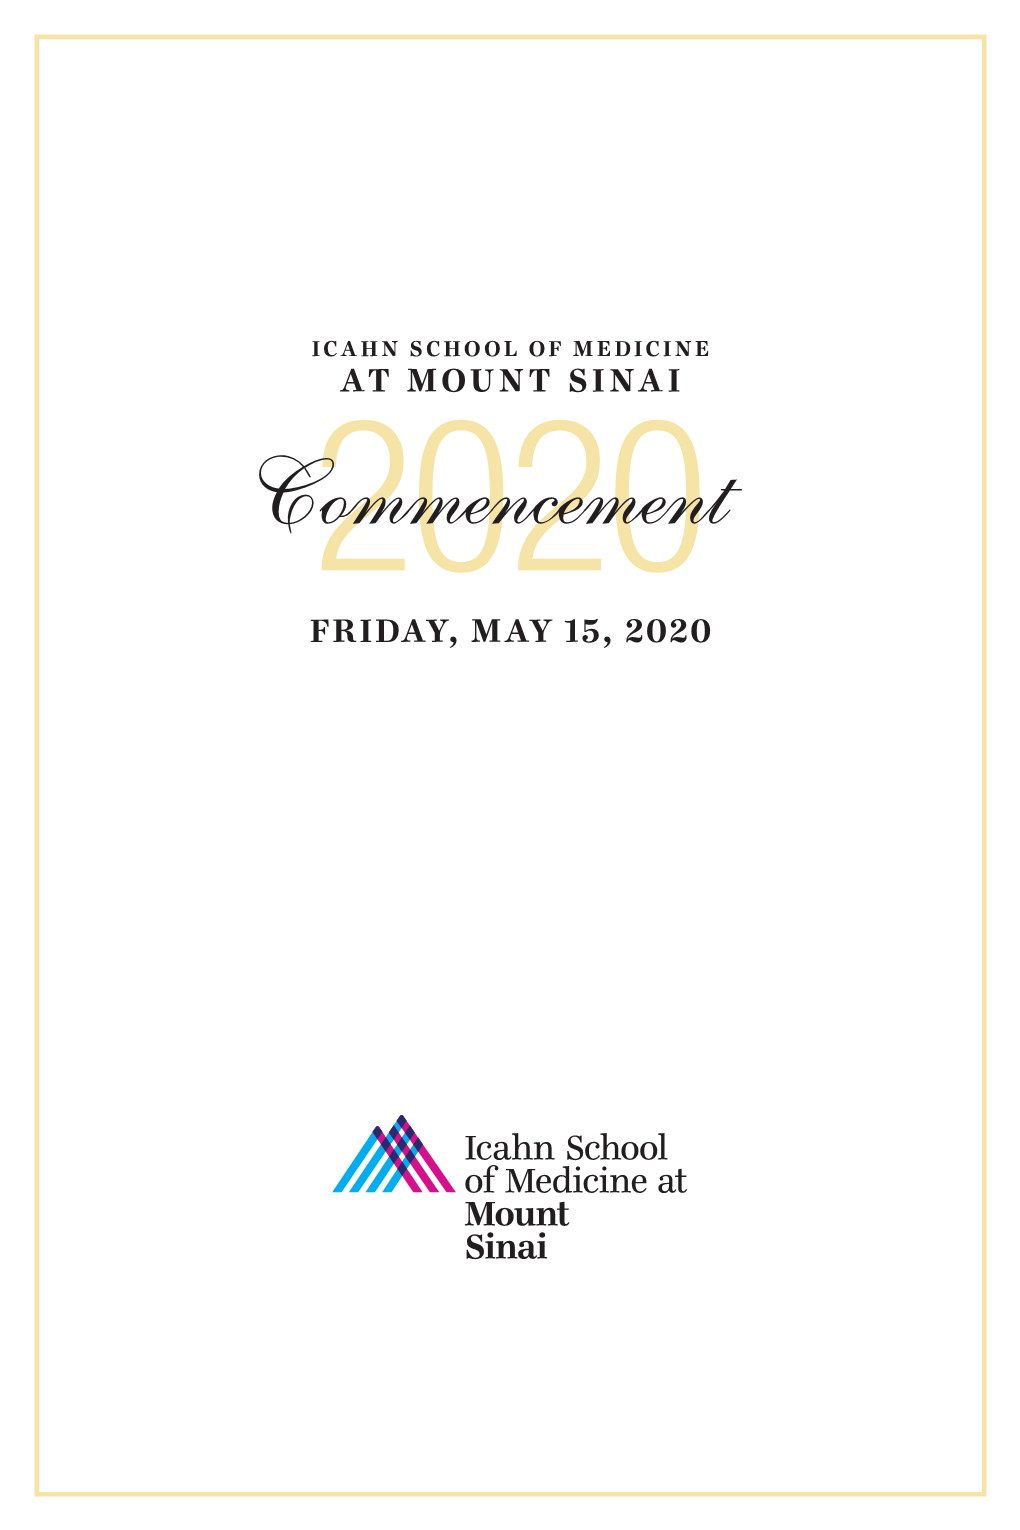 Commencement2020 FRIDAY, MAY 15, 2020 ICAHN SCHOOL of MEDICINE at MOUNT SINAI